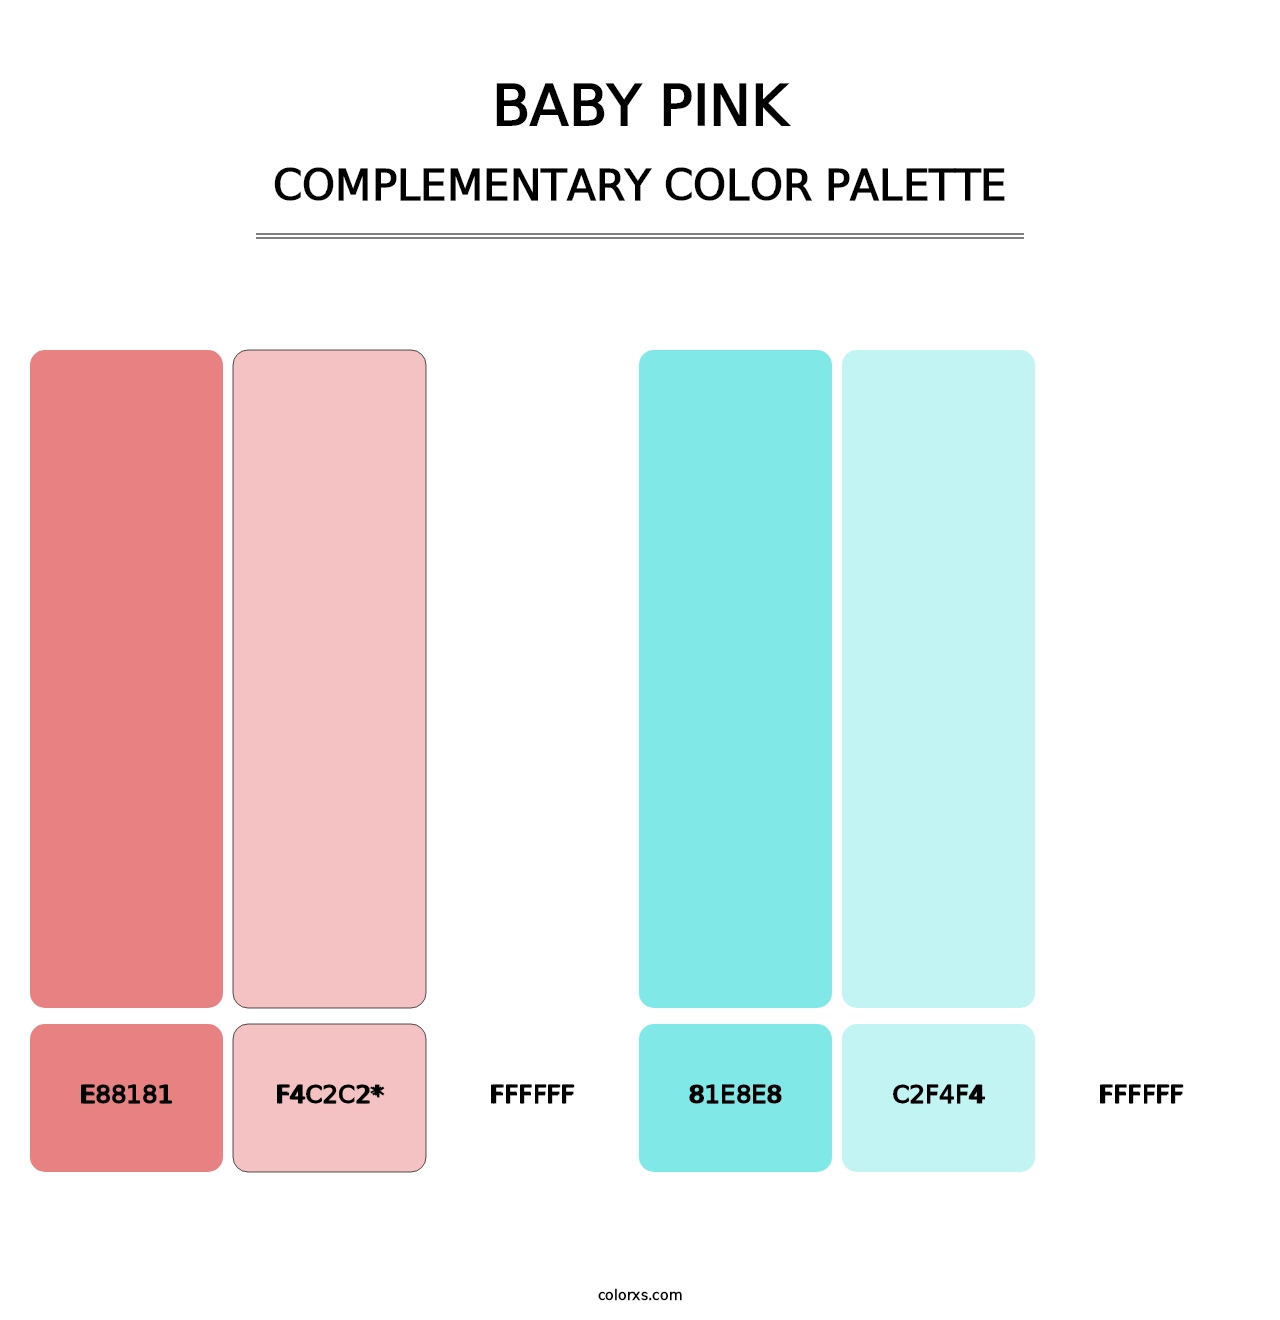 Baby Pink - Complementary Color Palette